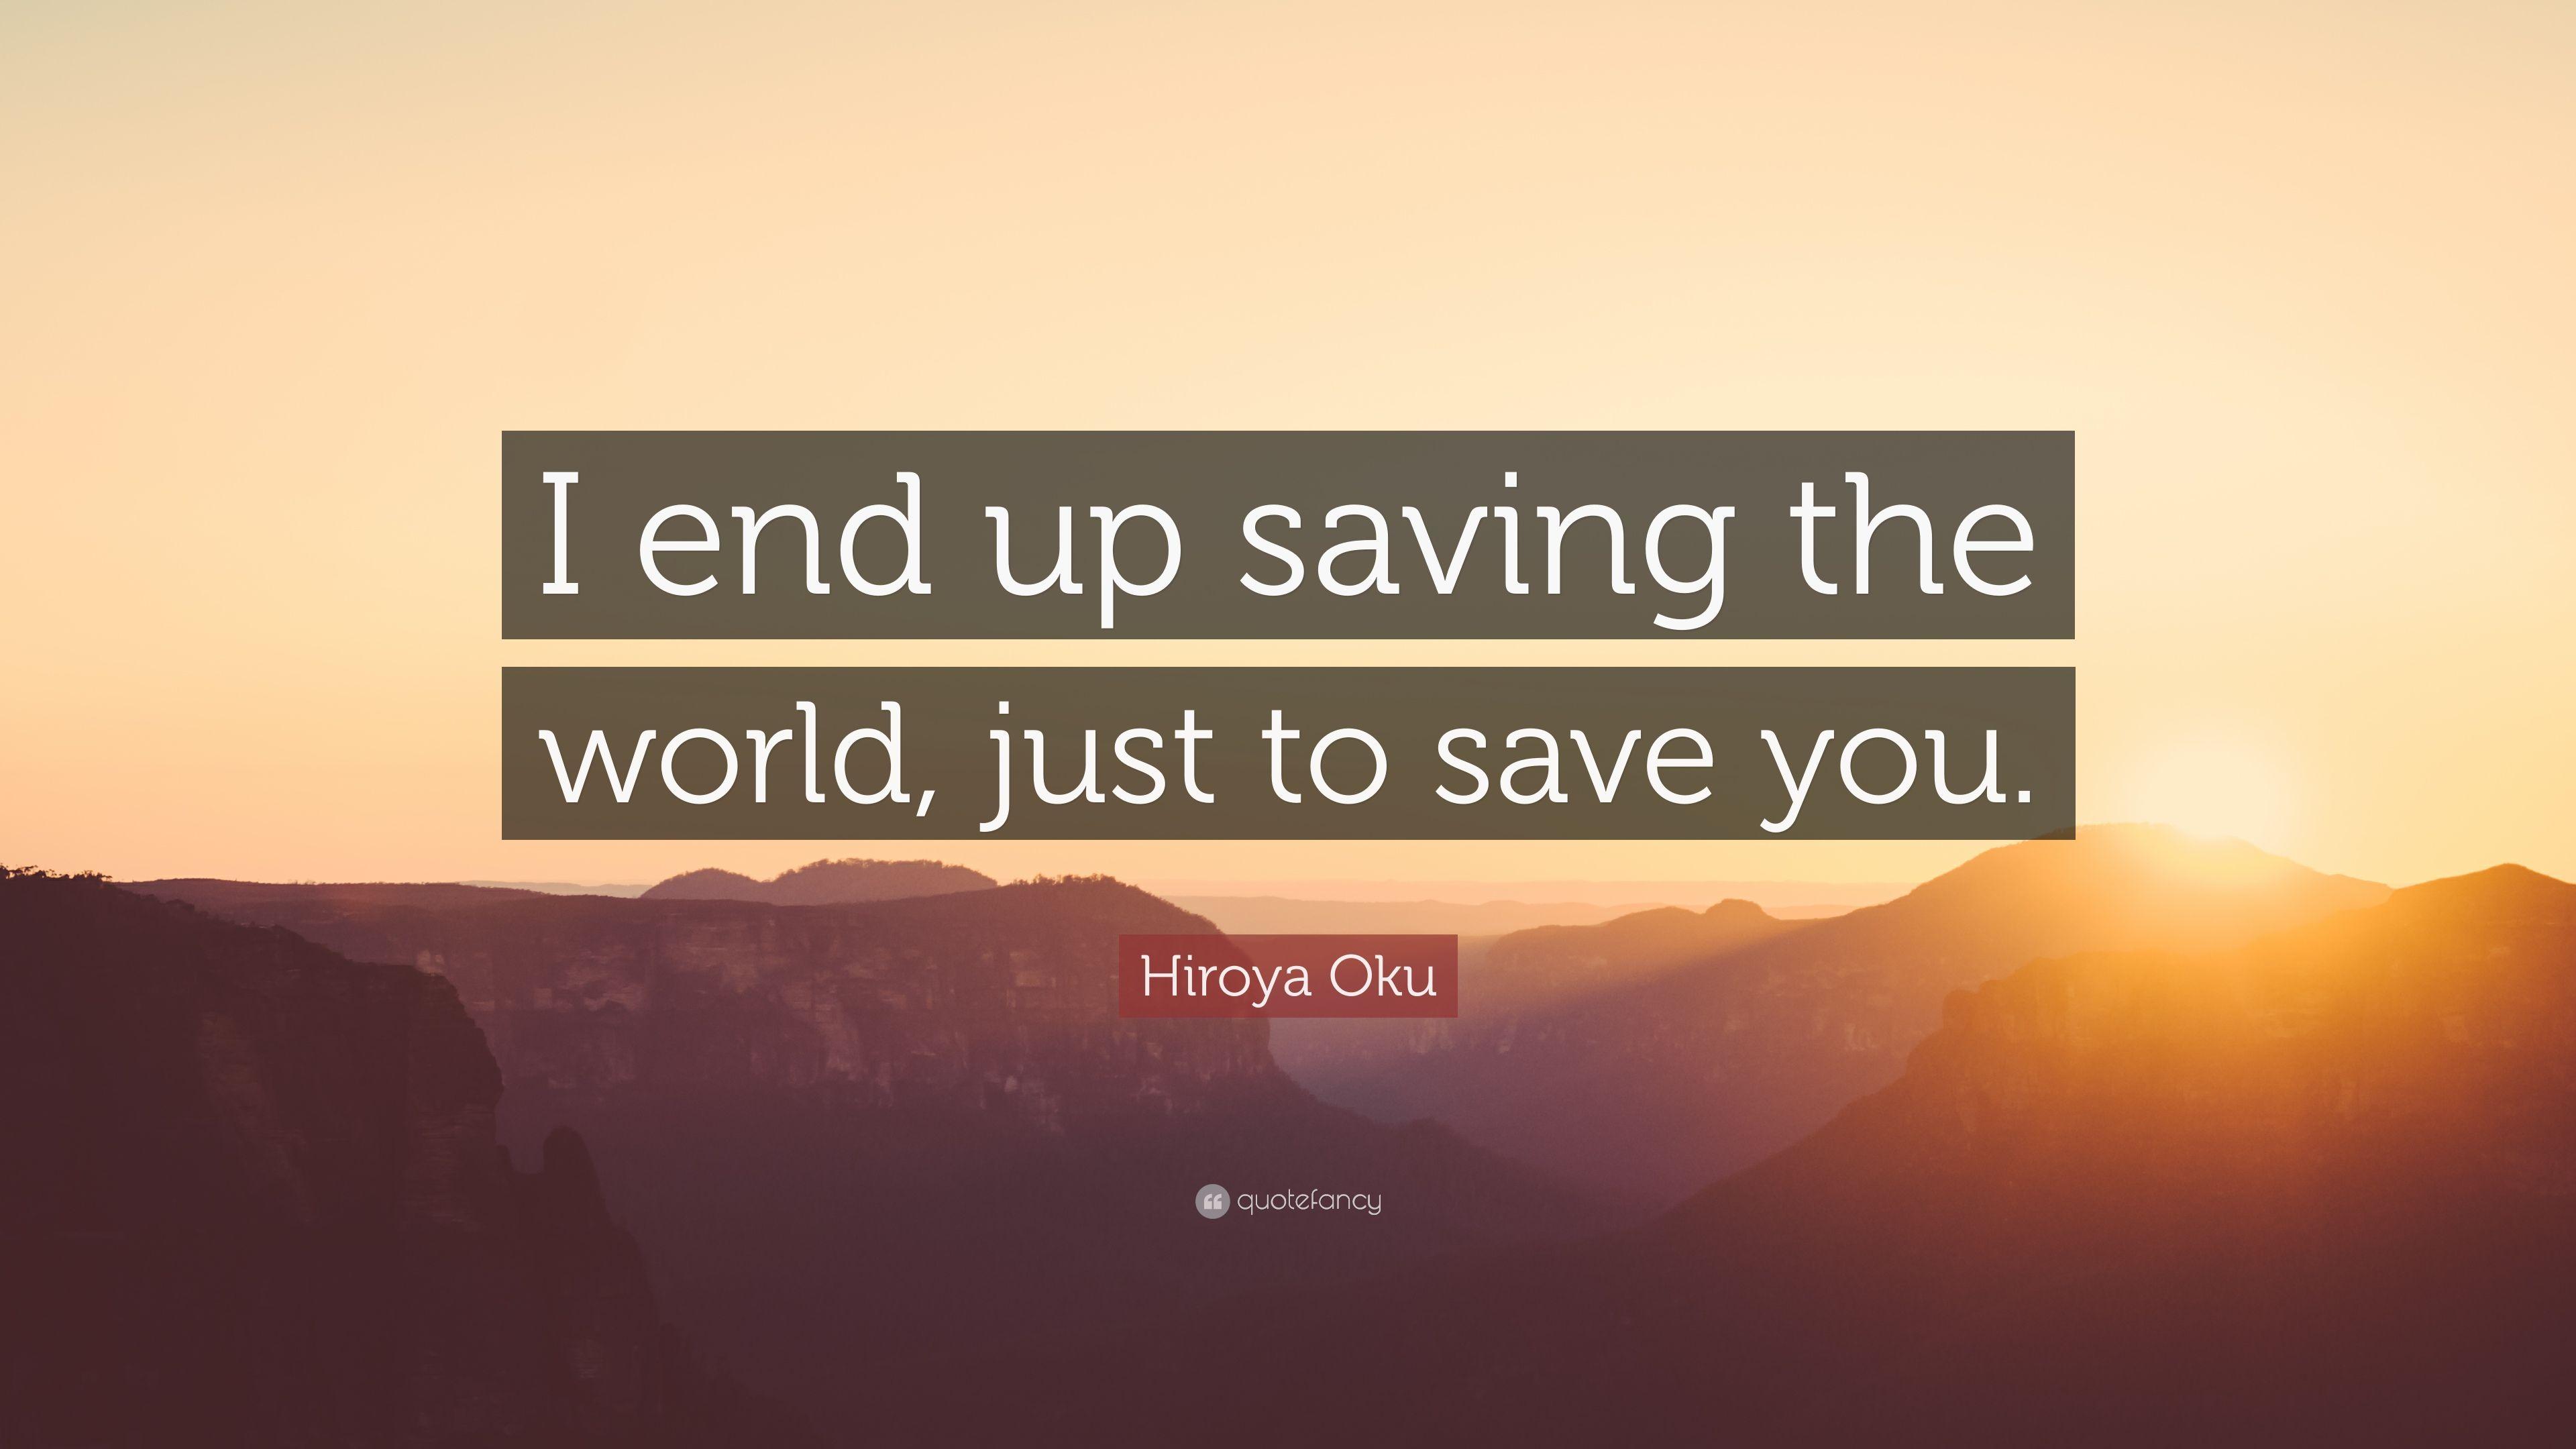 Hiroya Oku Quote: “I end up saving the world, just to save you.” 7